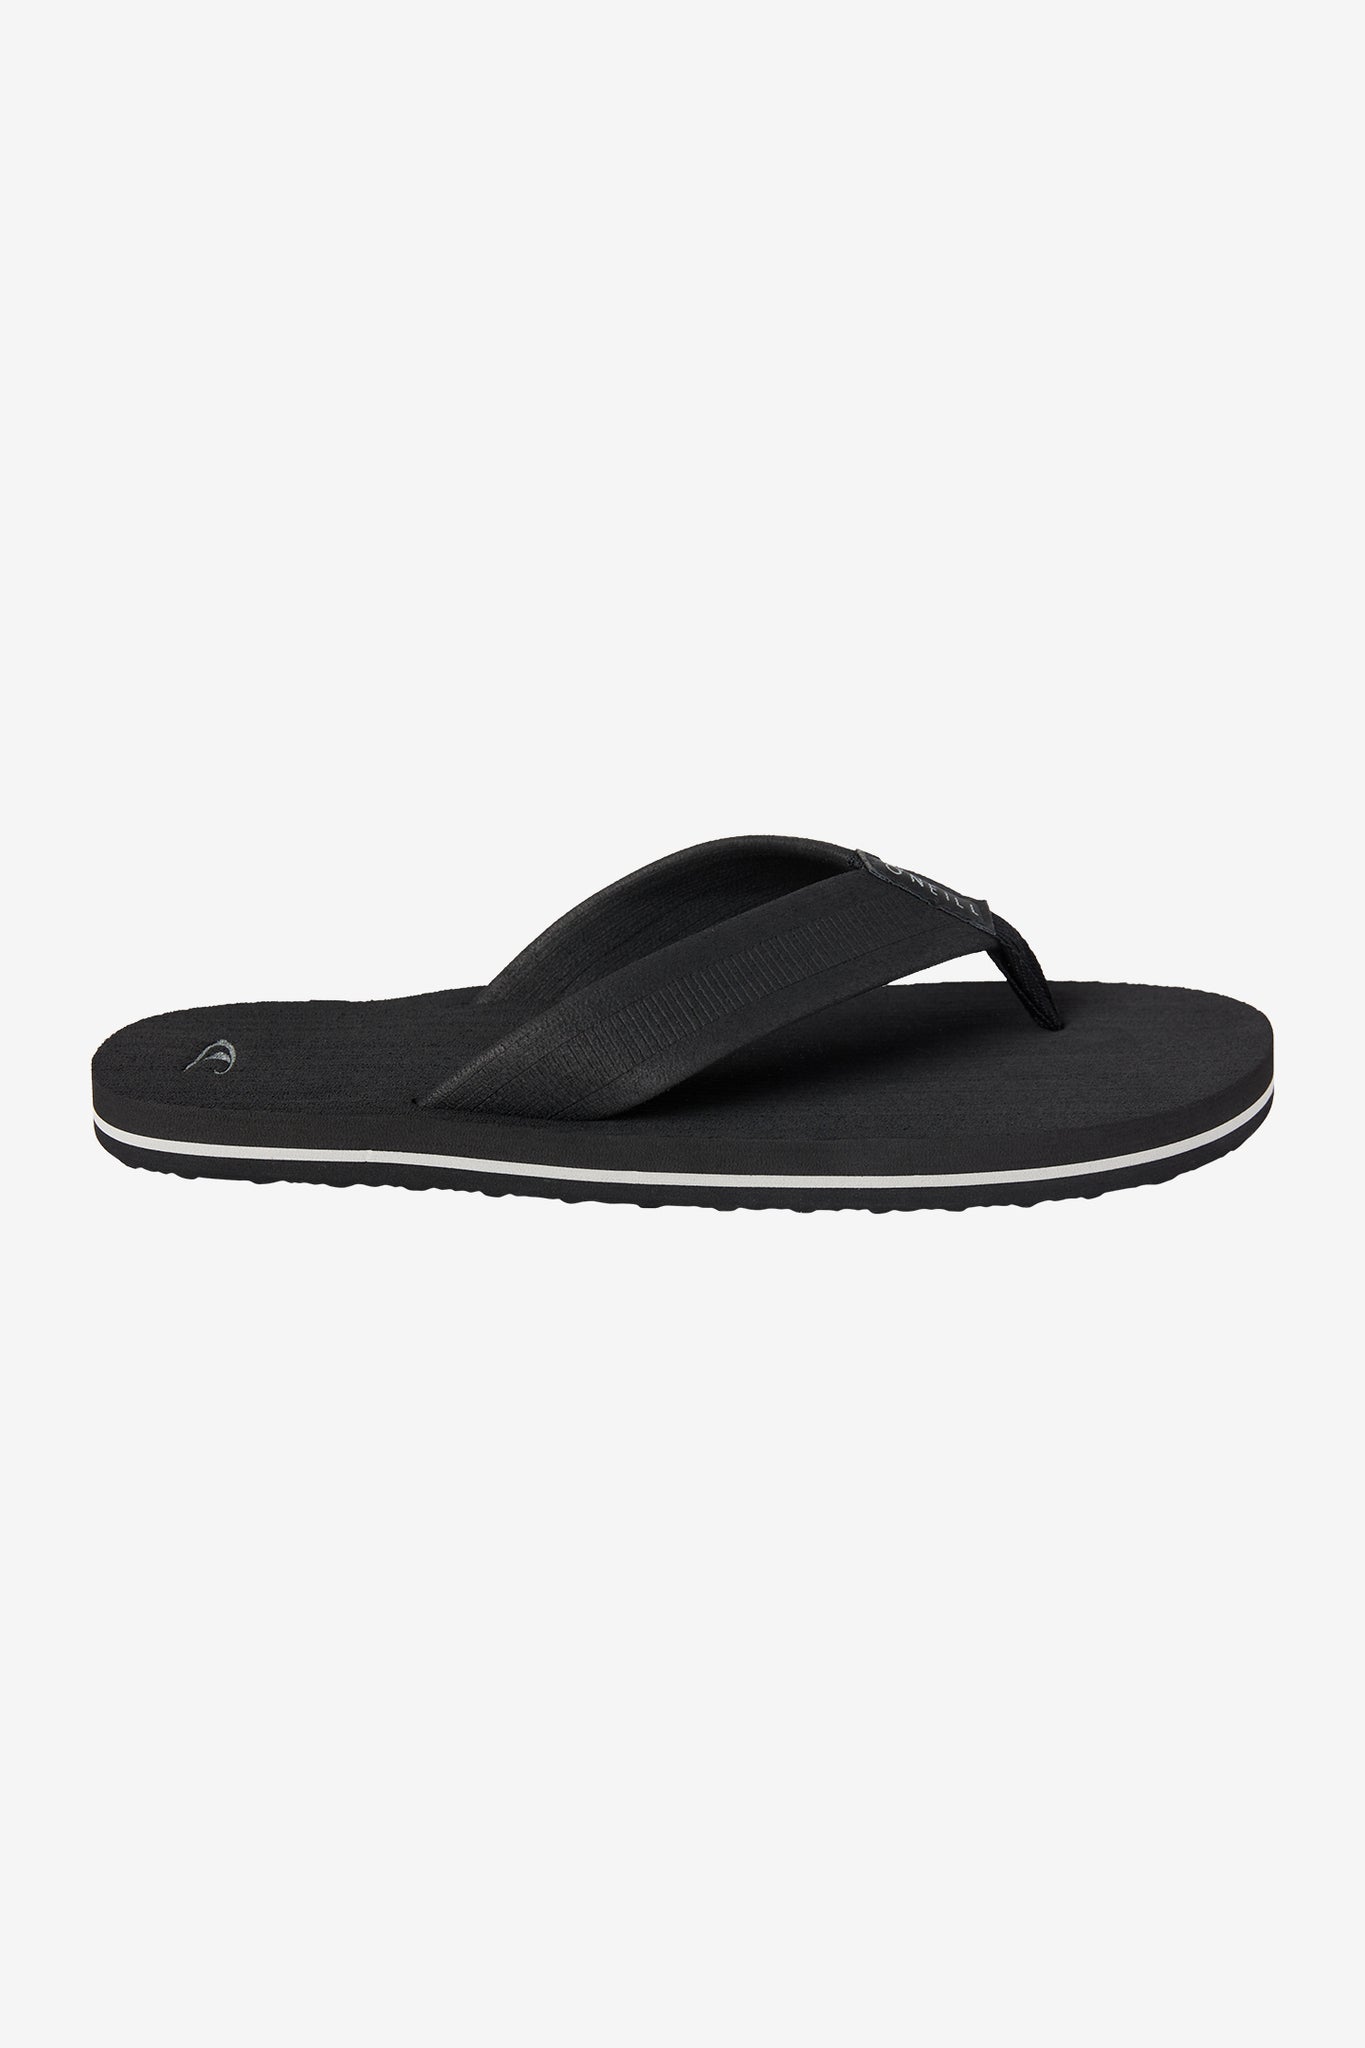 Expedition Sandals - Black | O'Neill